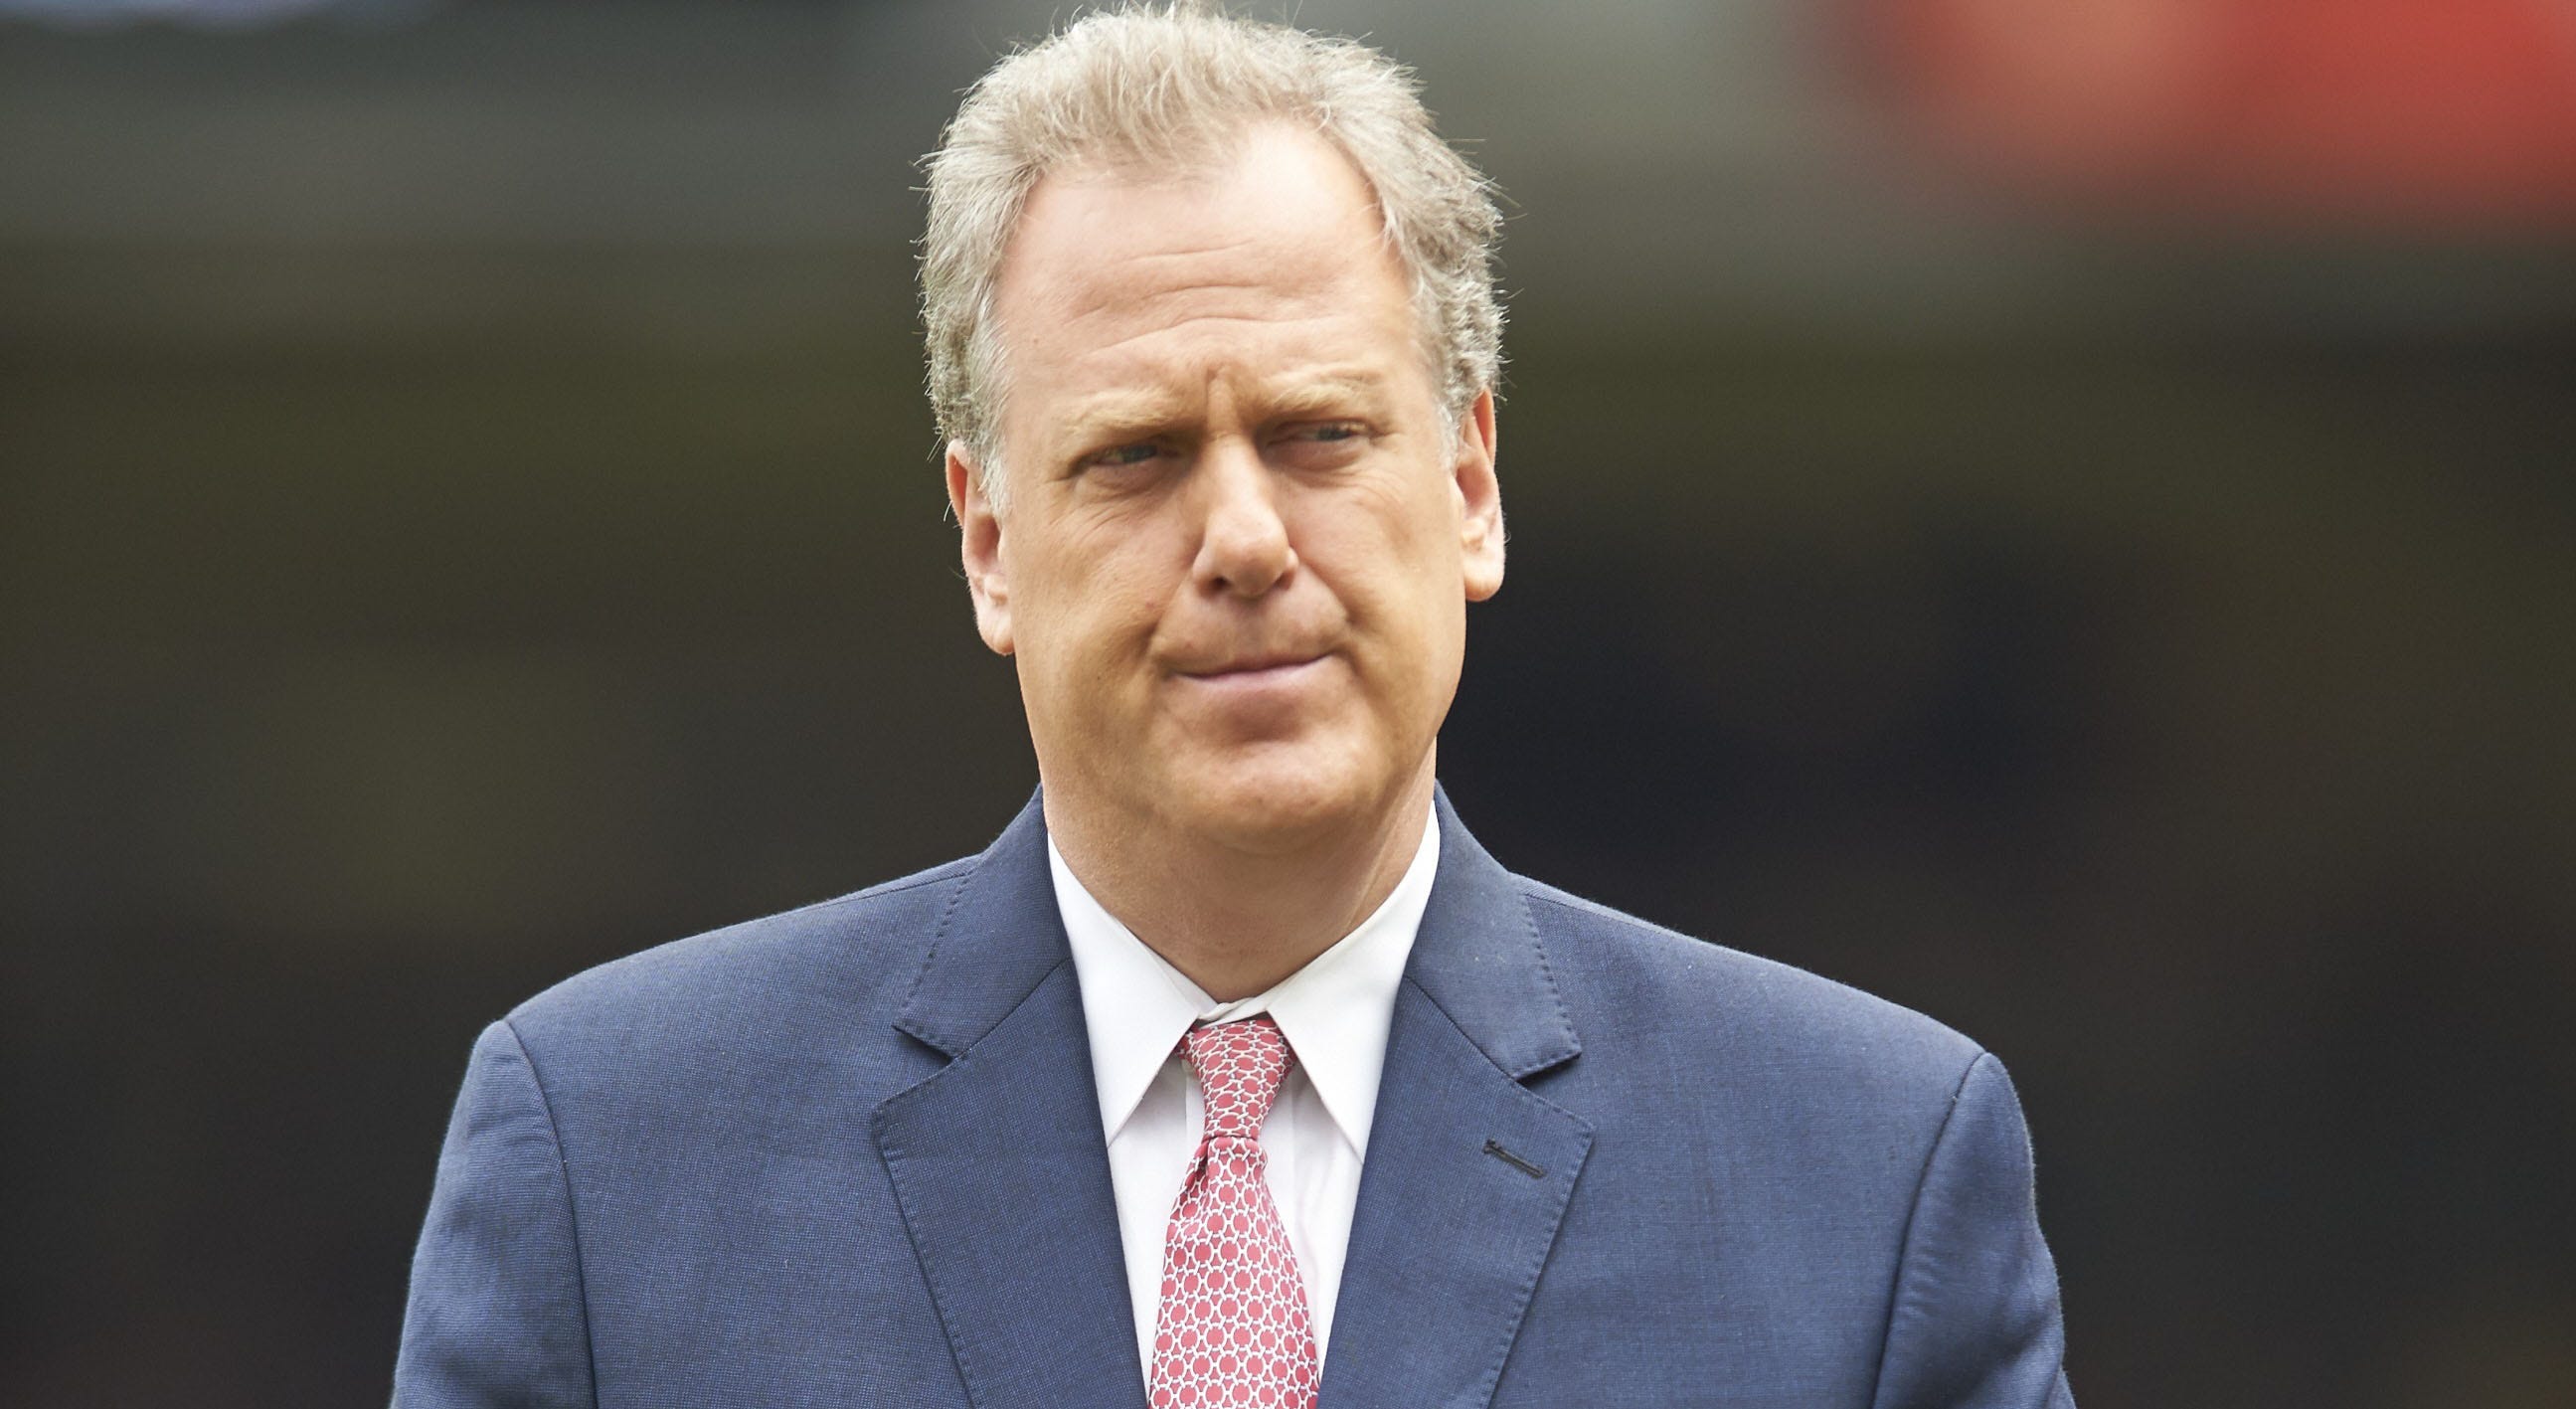 Curt Schilling sounds off on Michael Kay’s call of Aaron Judge’s 61st home run: ‘Let the moment breathe’